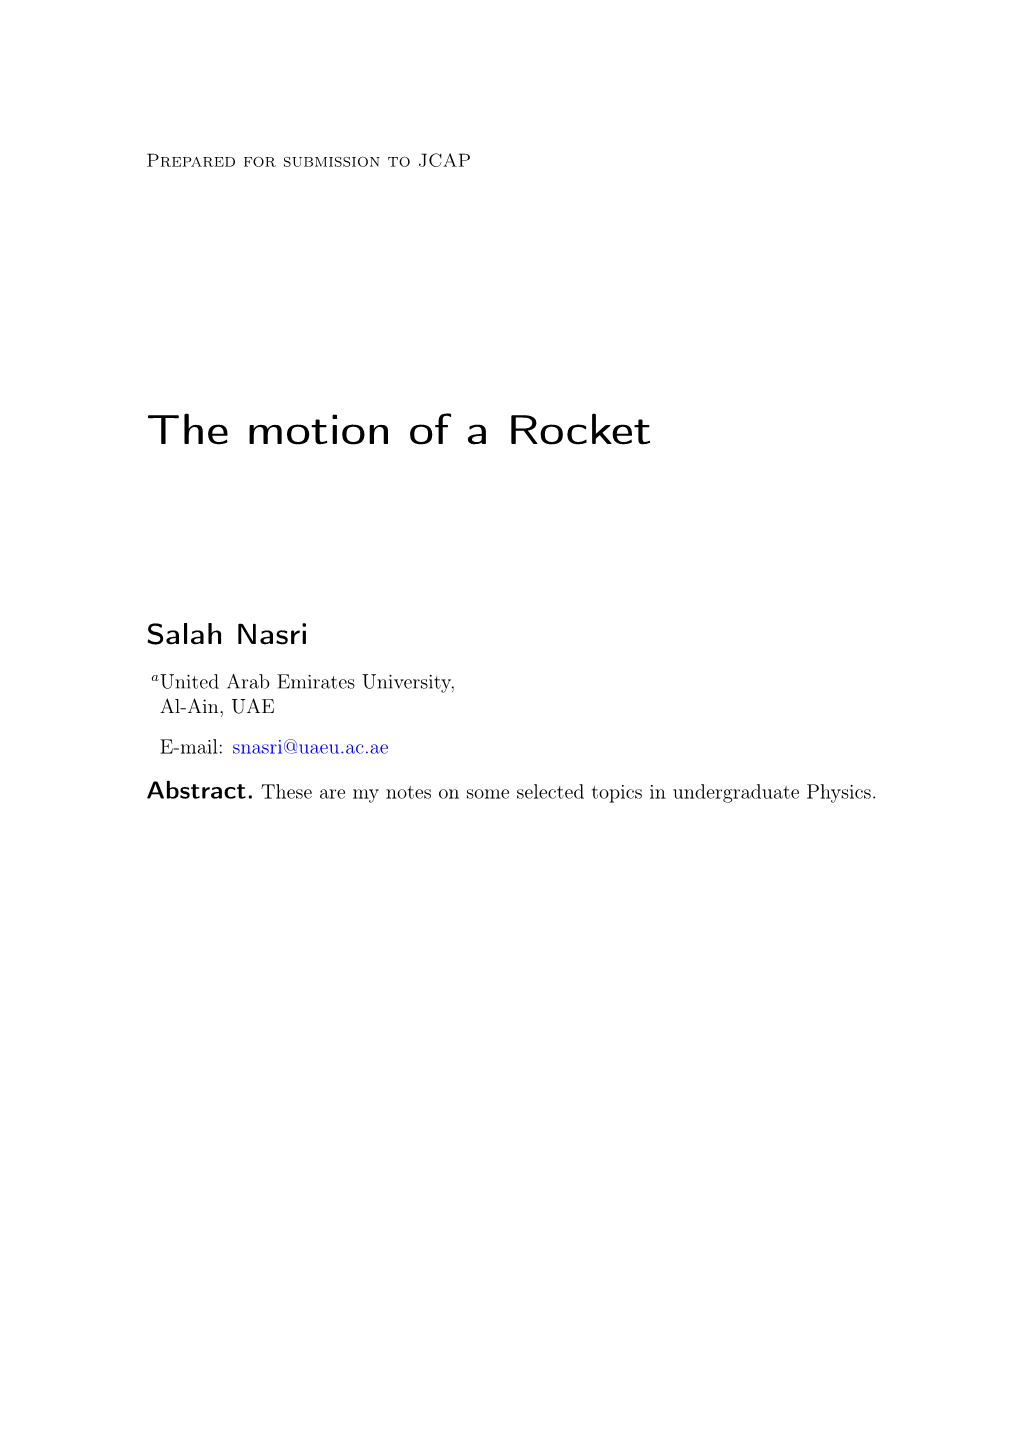 The Motion of a Rocket